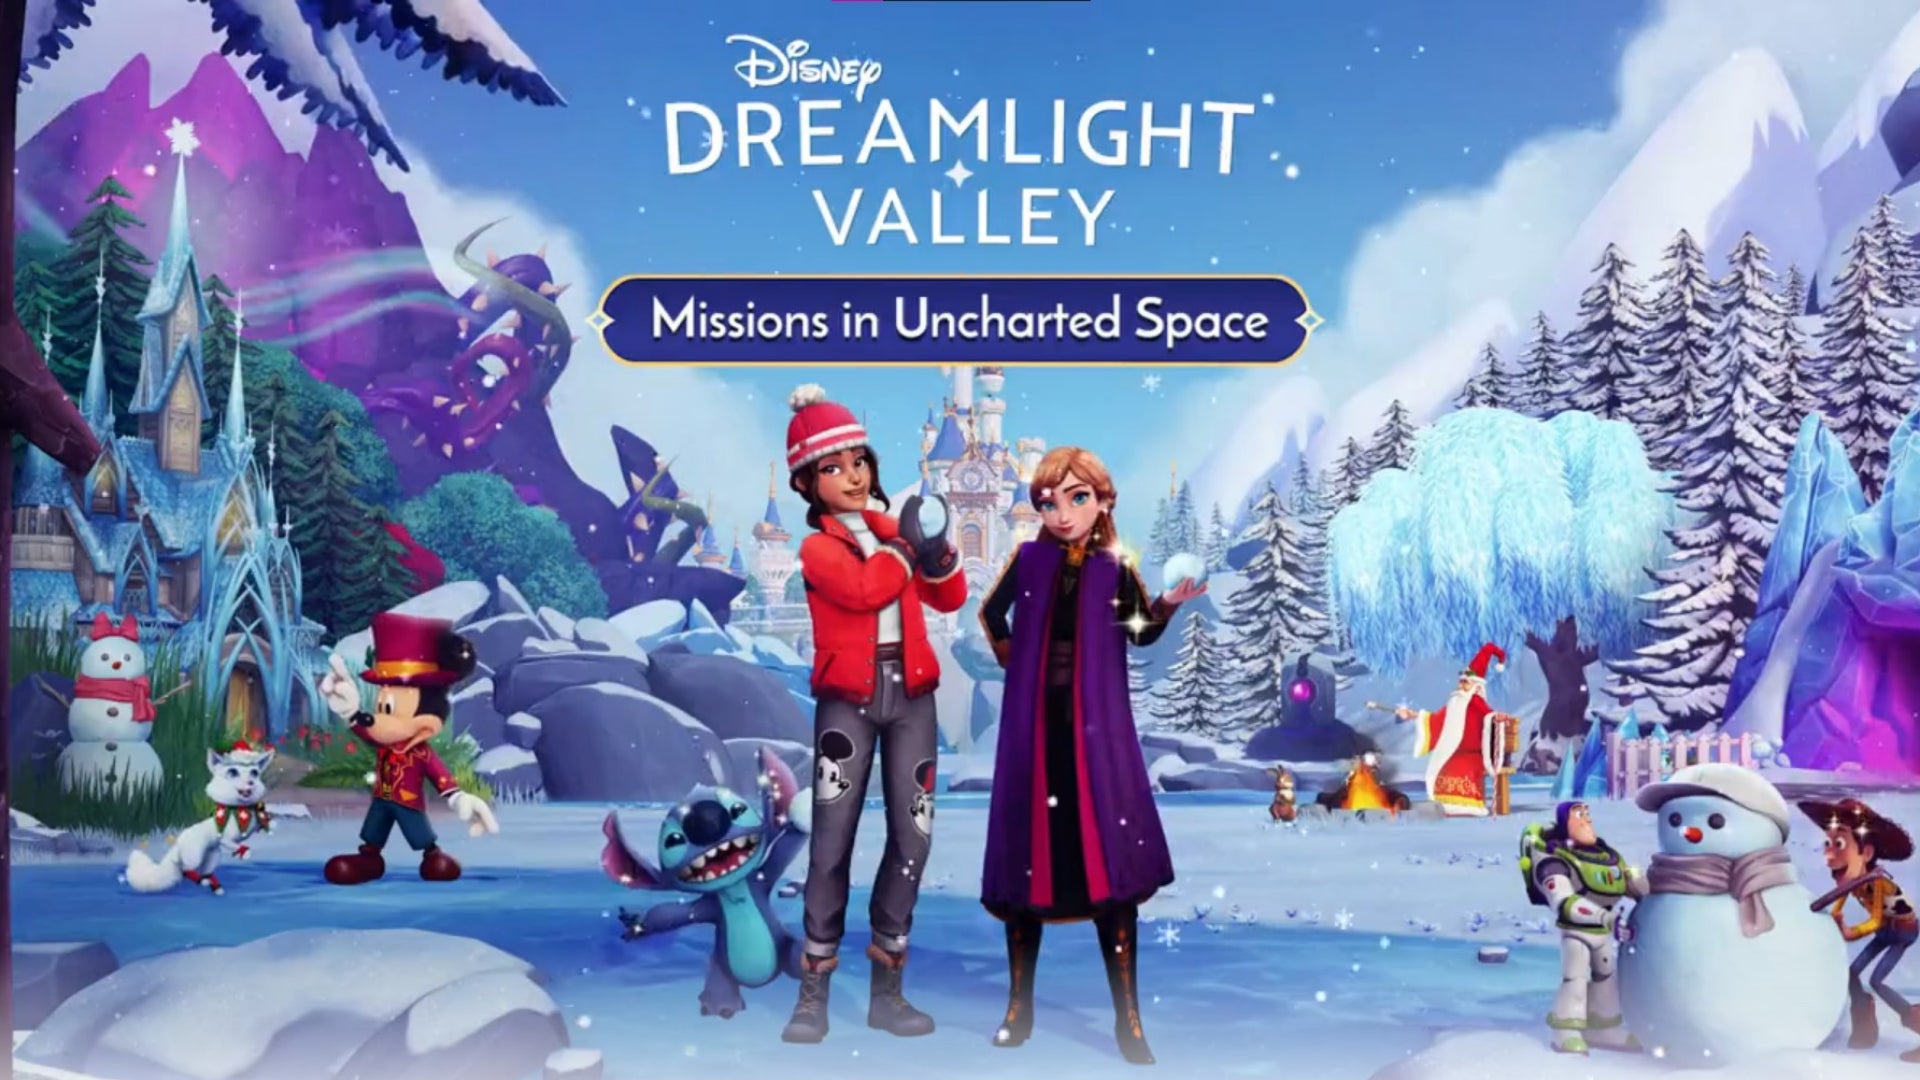 Image for Stitch teased in latest Disney Dreamlight Valley promo